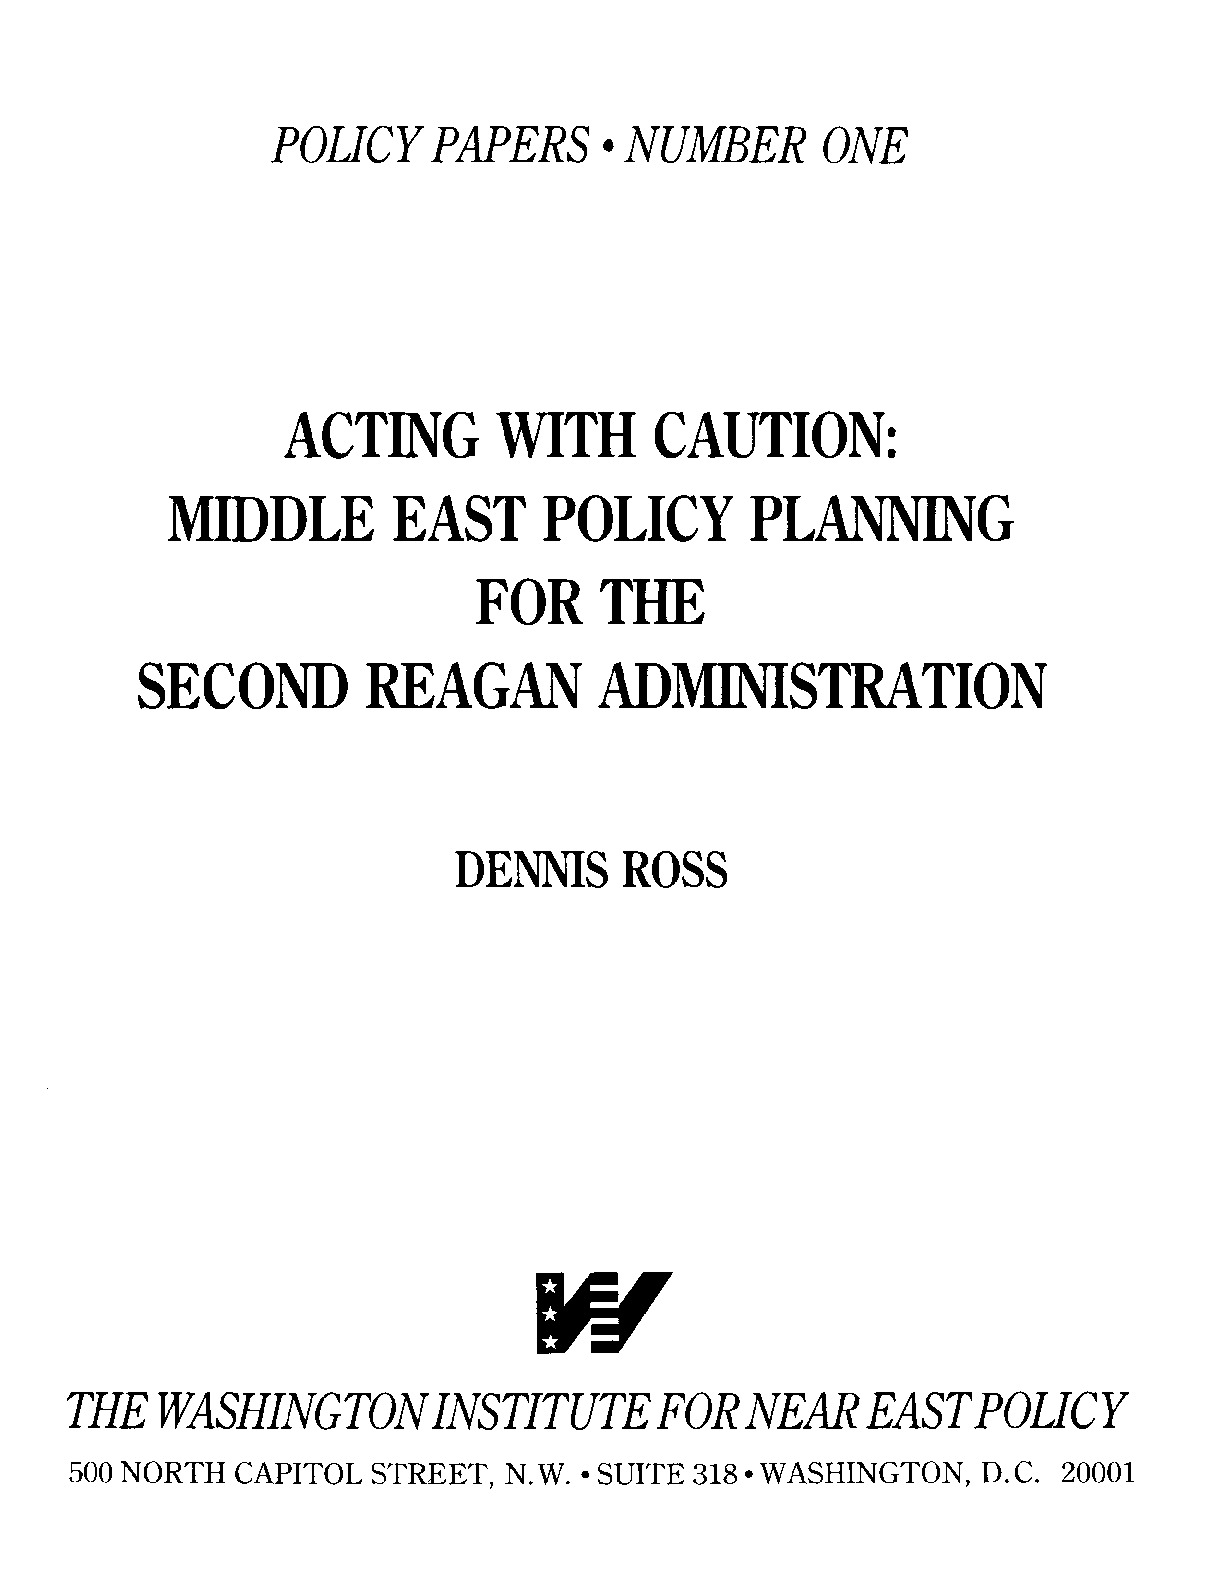 PP_1_ActingwithCaution.pdf